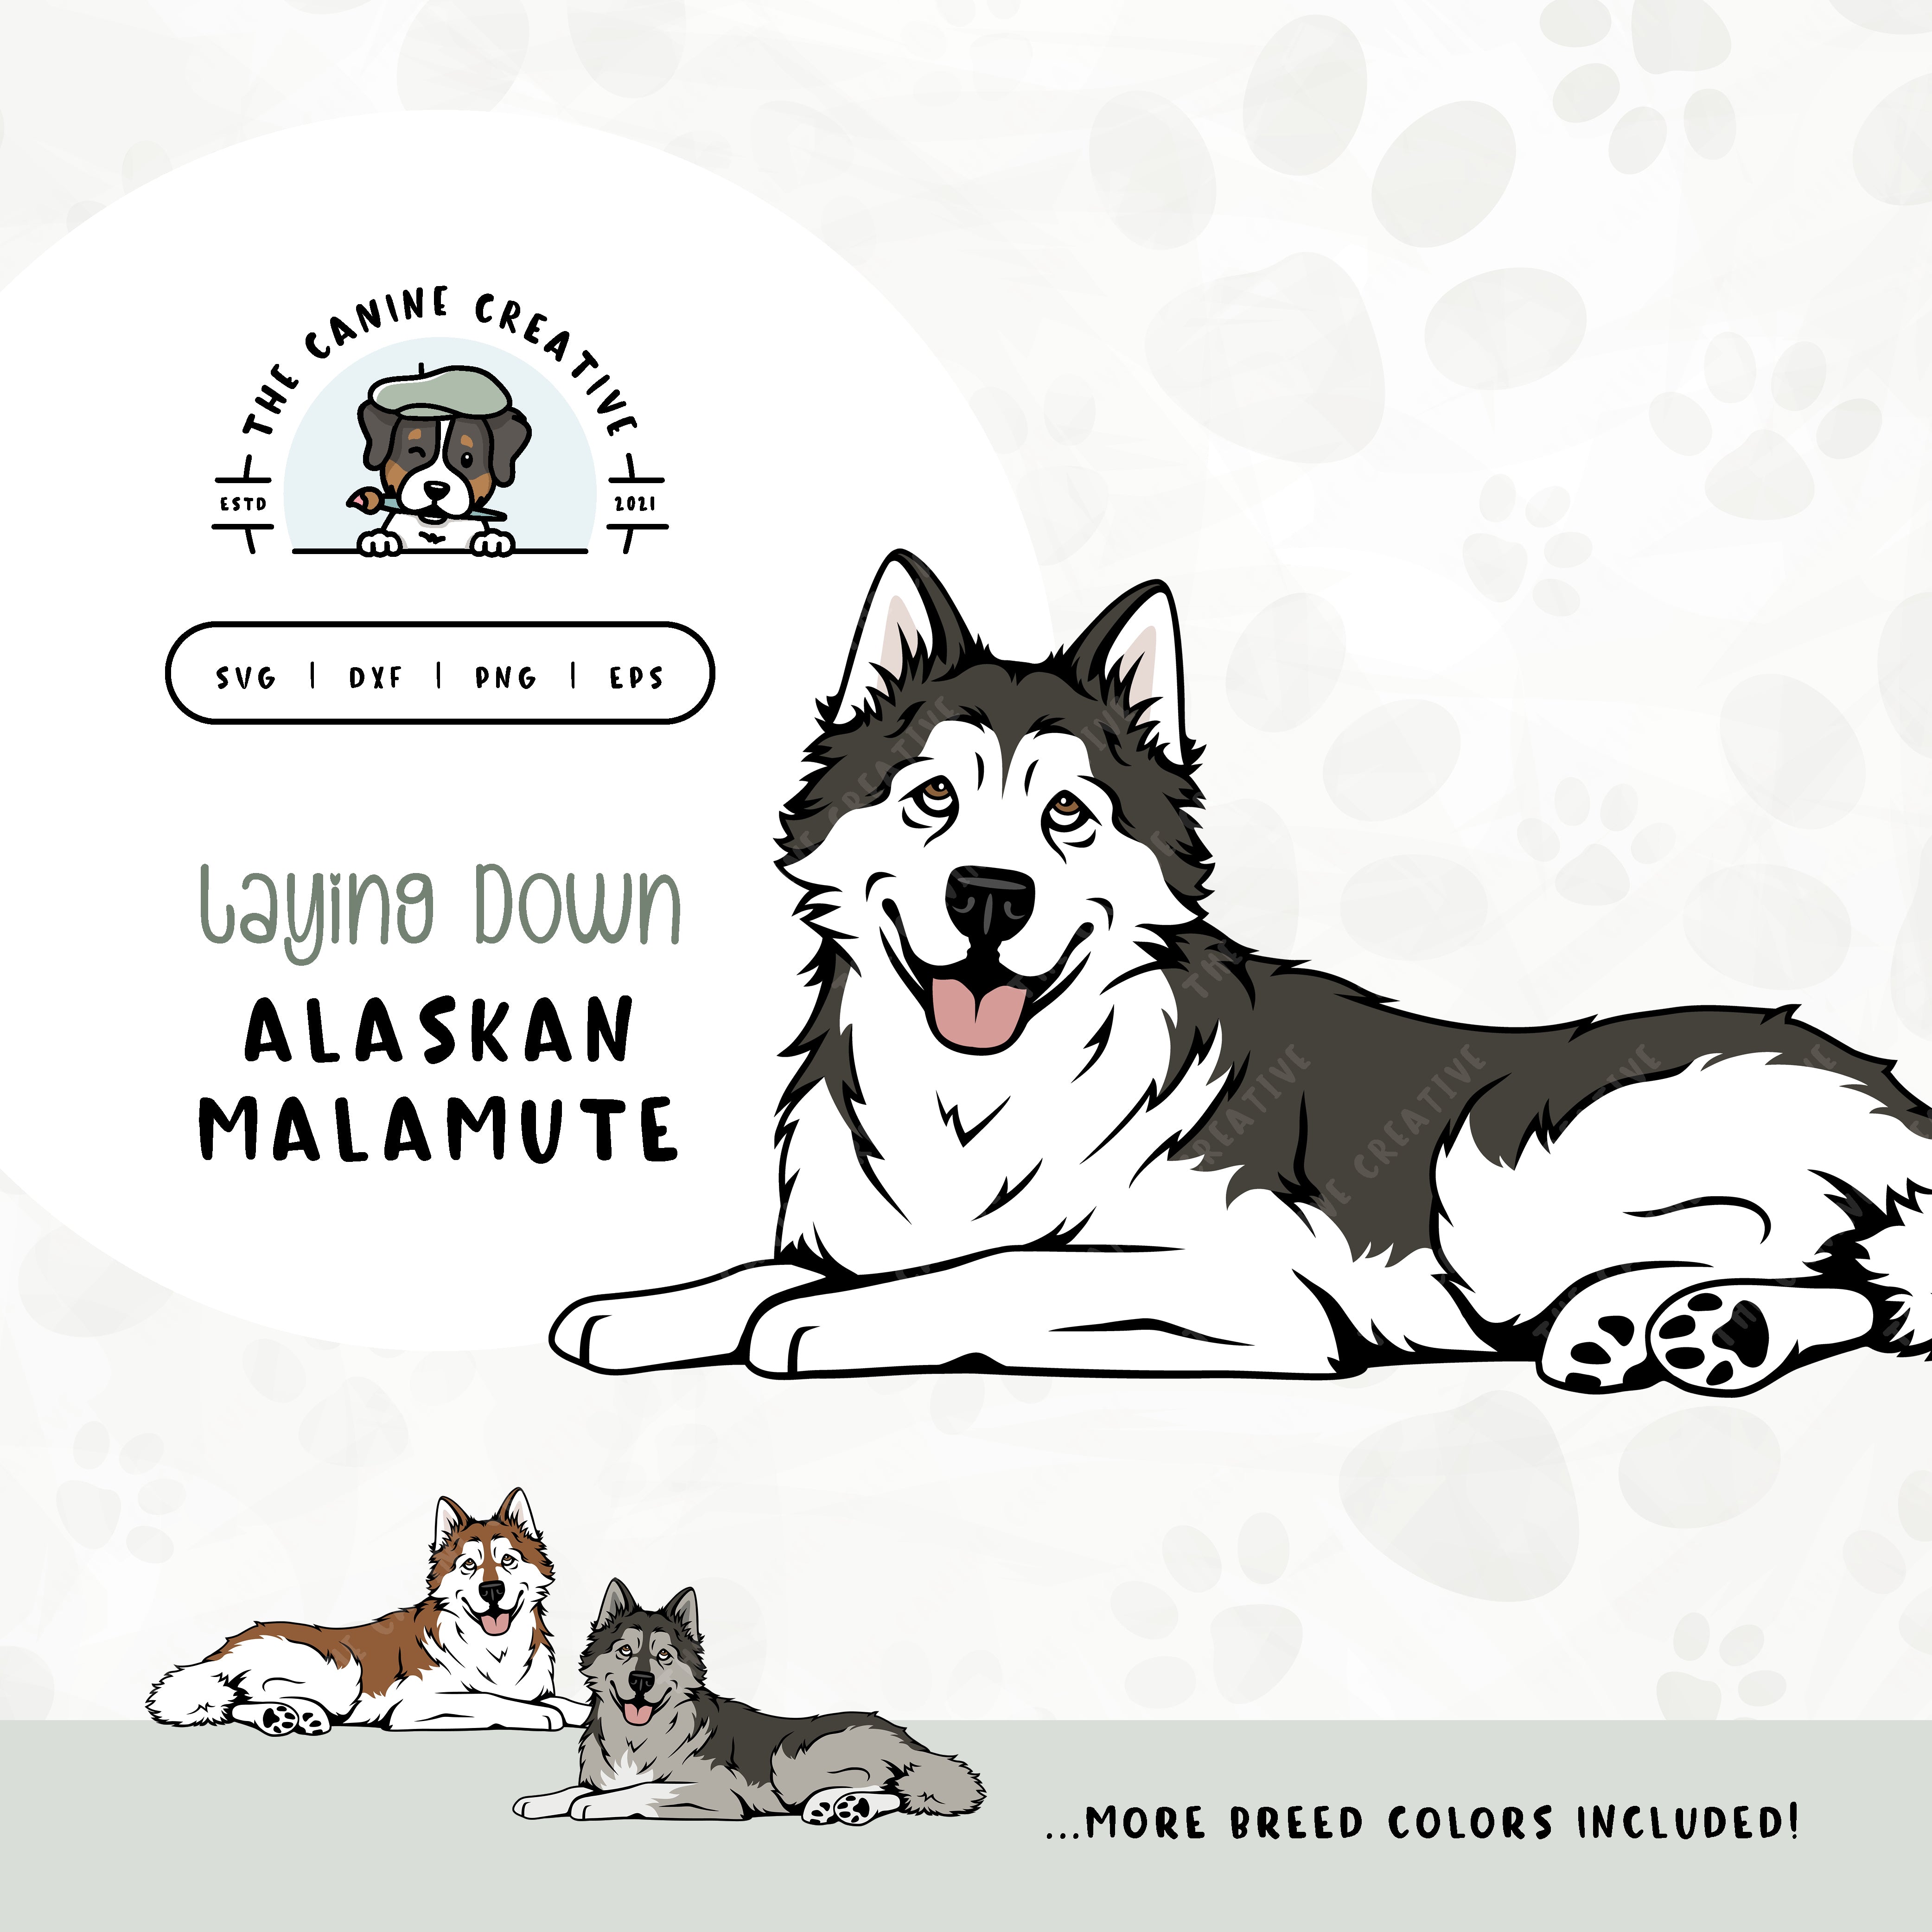 This laying down dog design features an Alaskan Malamute. File formats include: SVG, DXF, PNG, and EPS.